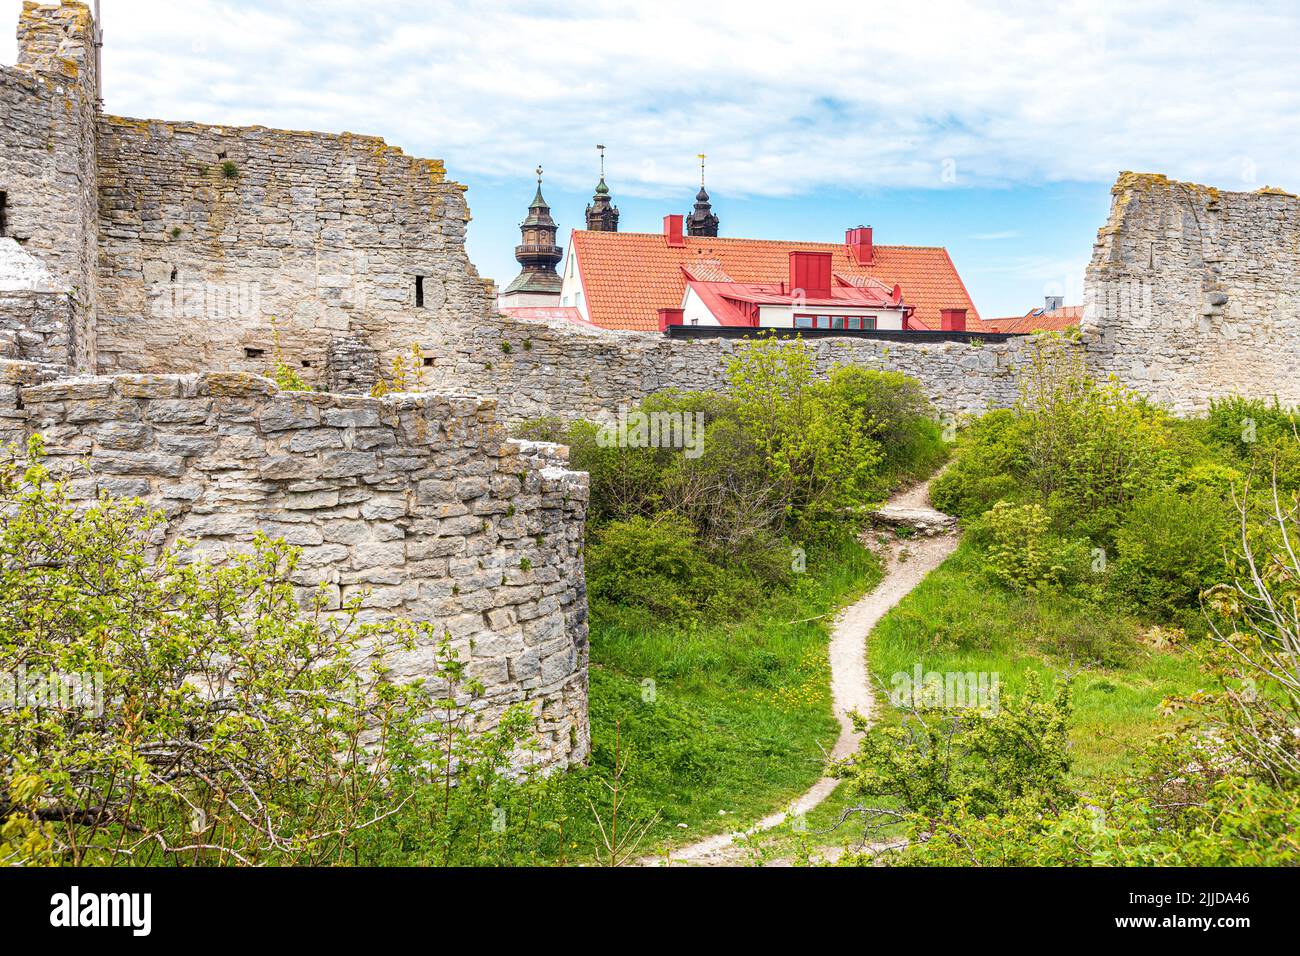 Visby City Wall (Visby Ringmur Visby Ring Wall) around the medieval town of Visby on the island of Gotland in the Baltic Sea off Sweden Stock Photo